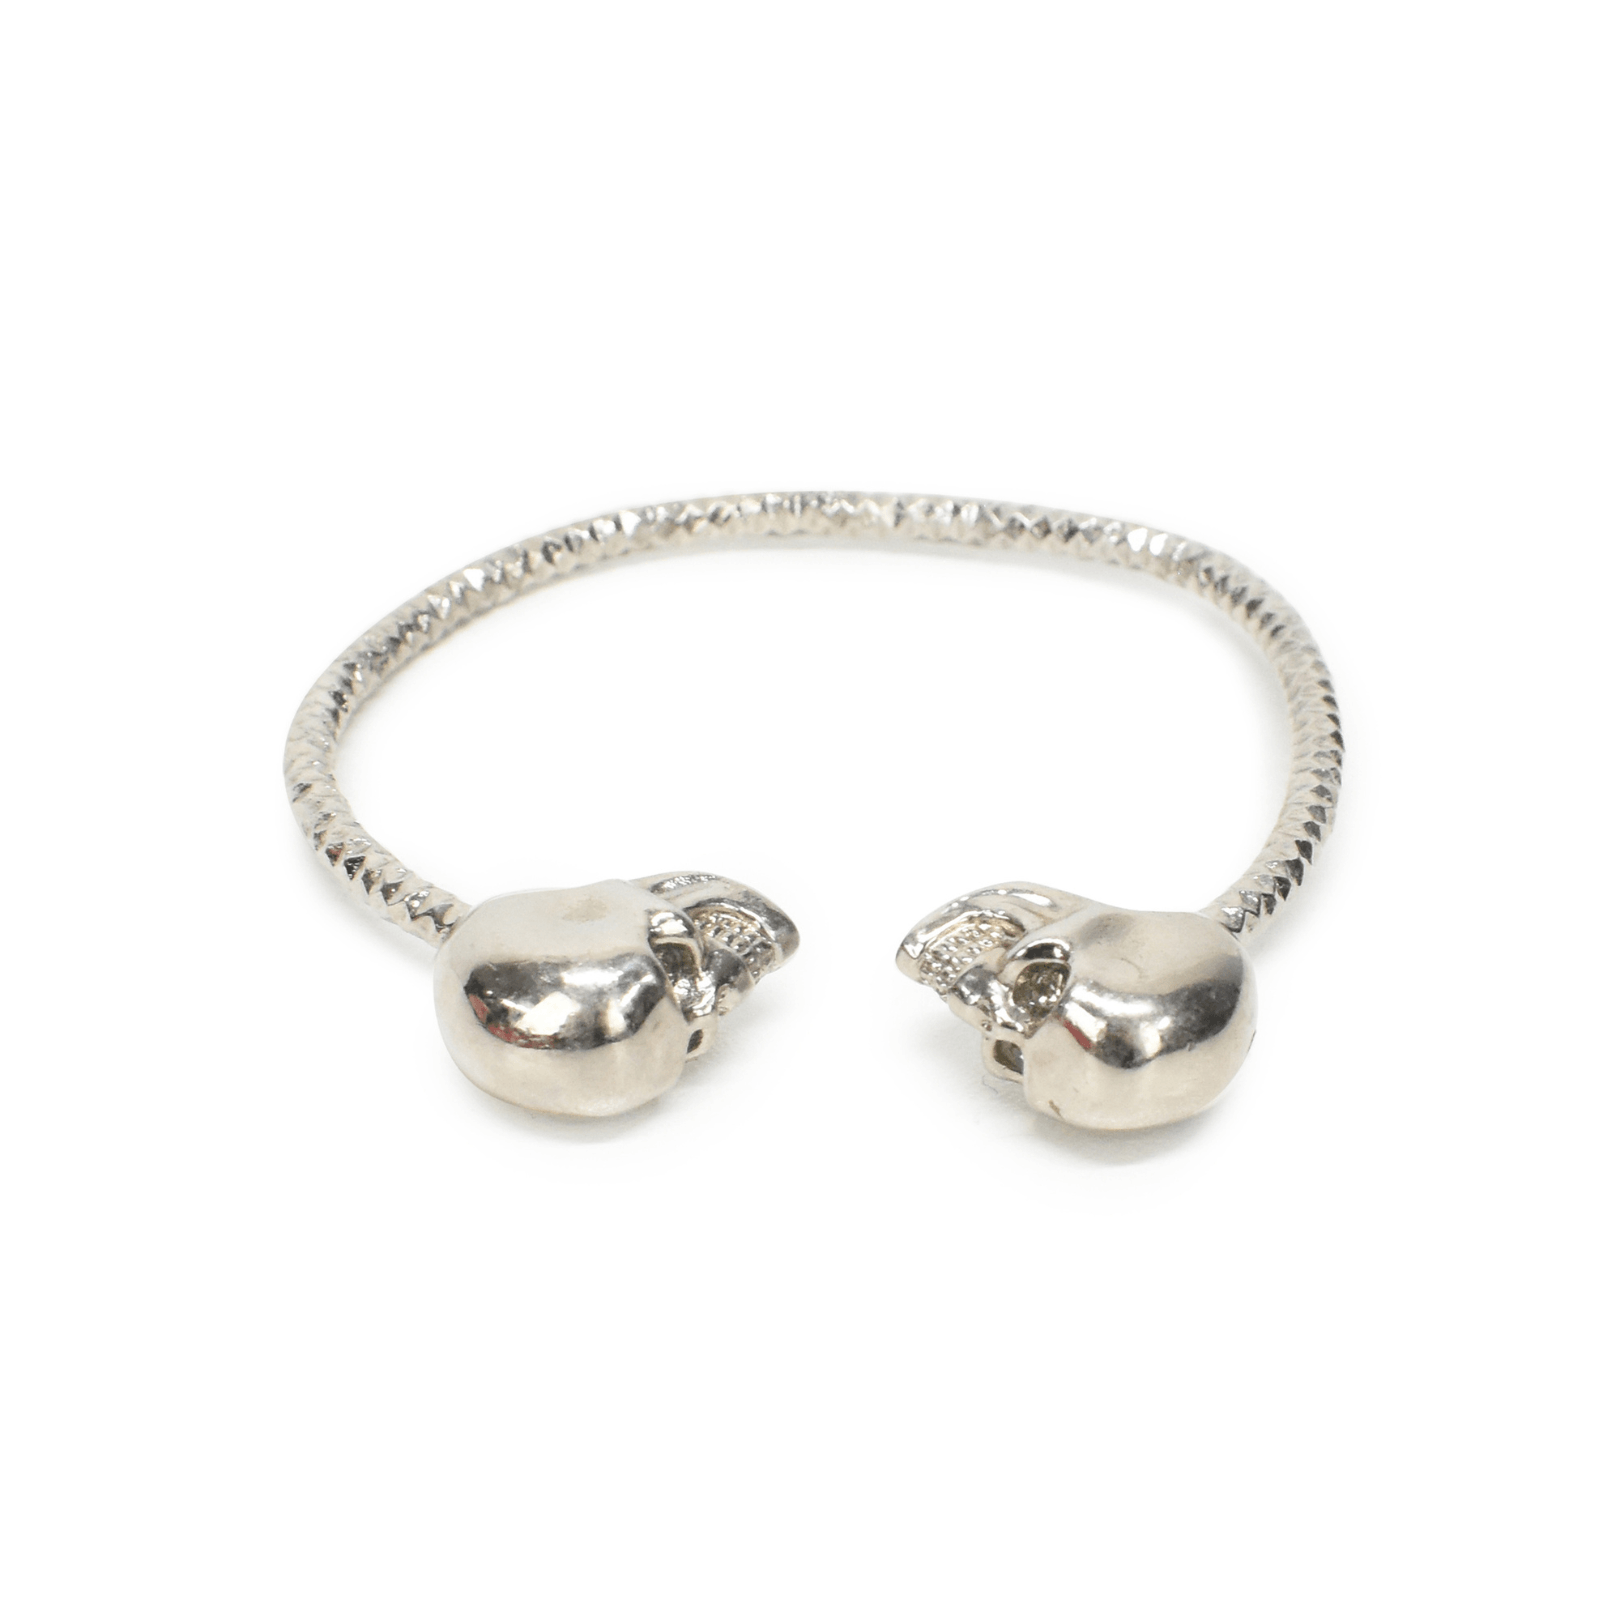 Alexander McQueen Skull Bangle - Fashionably Yours